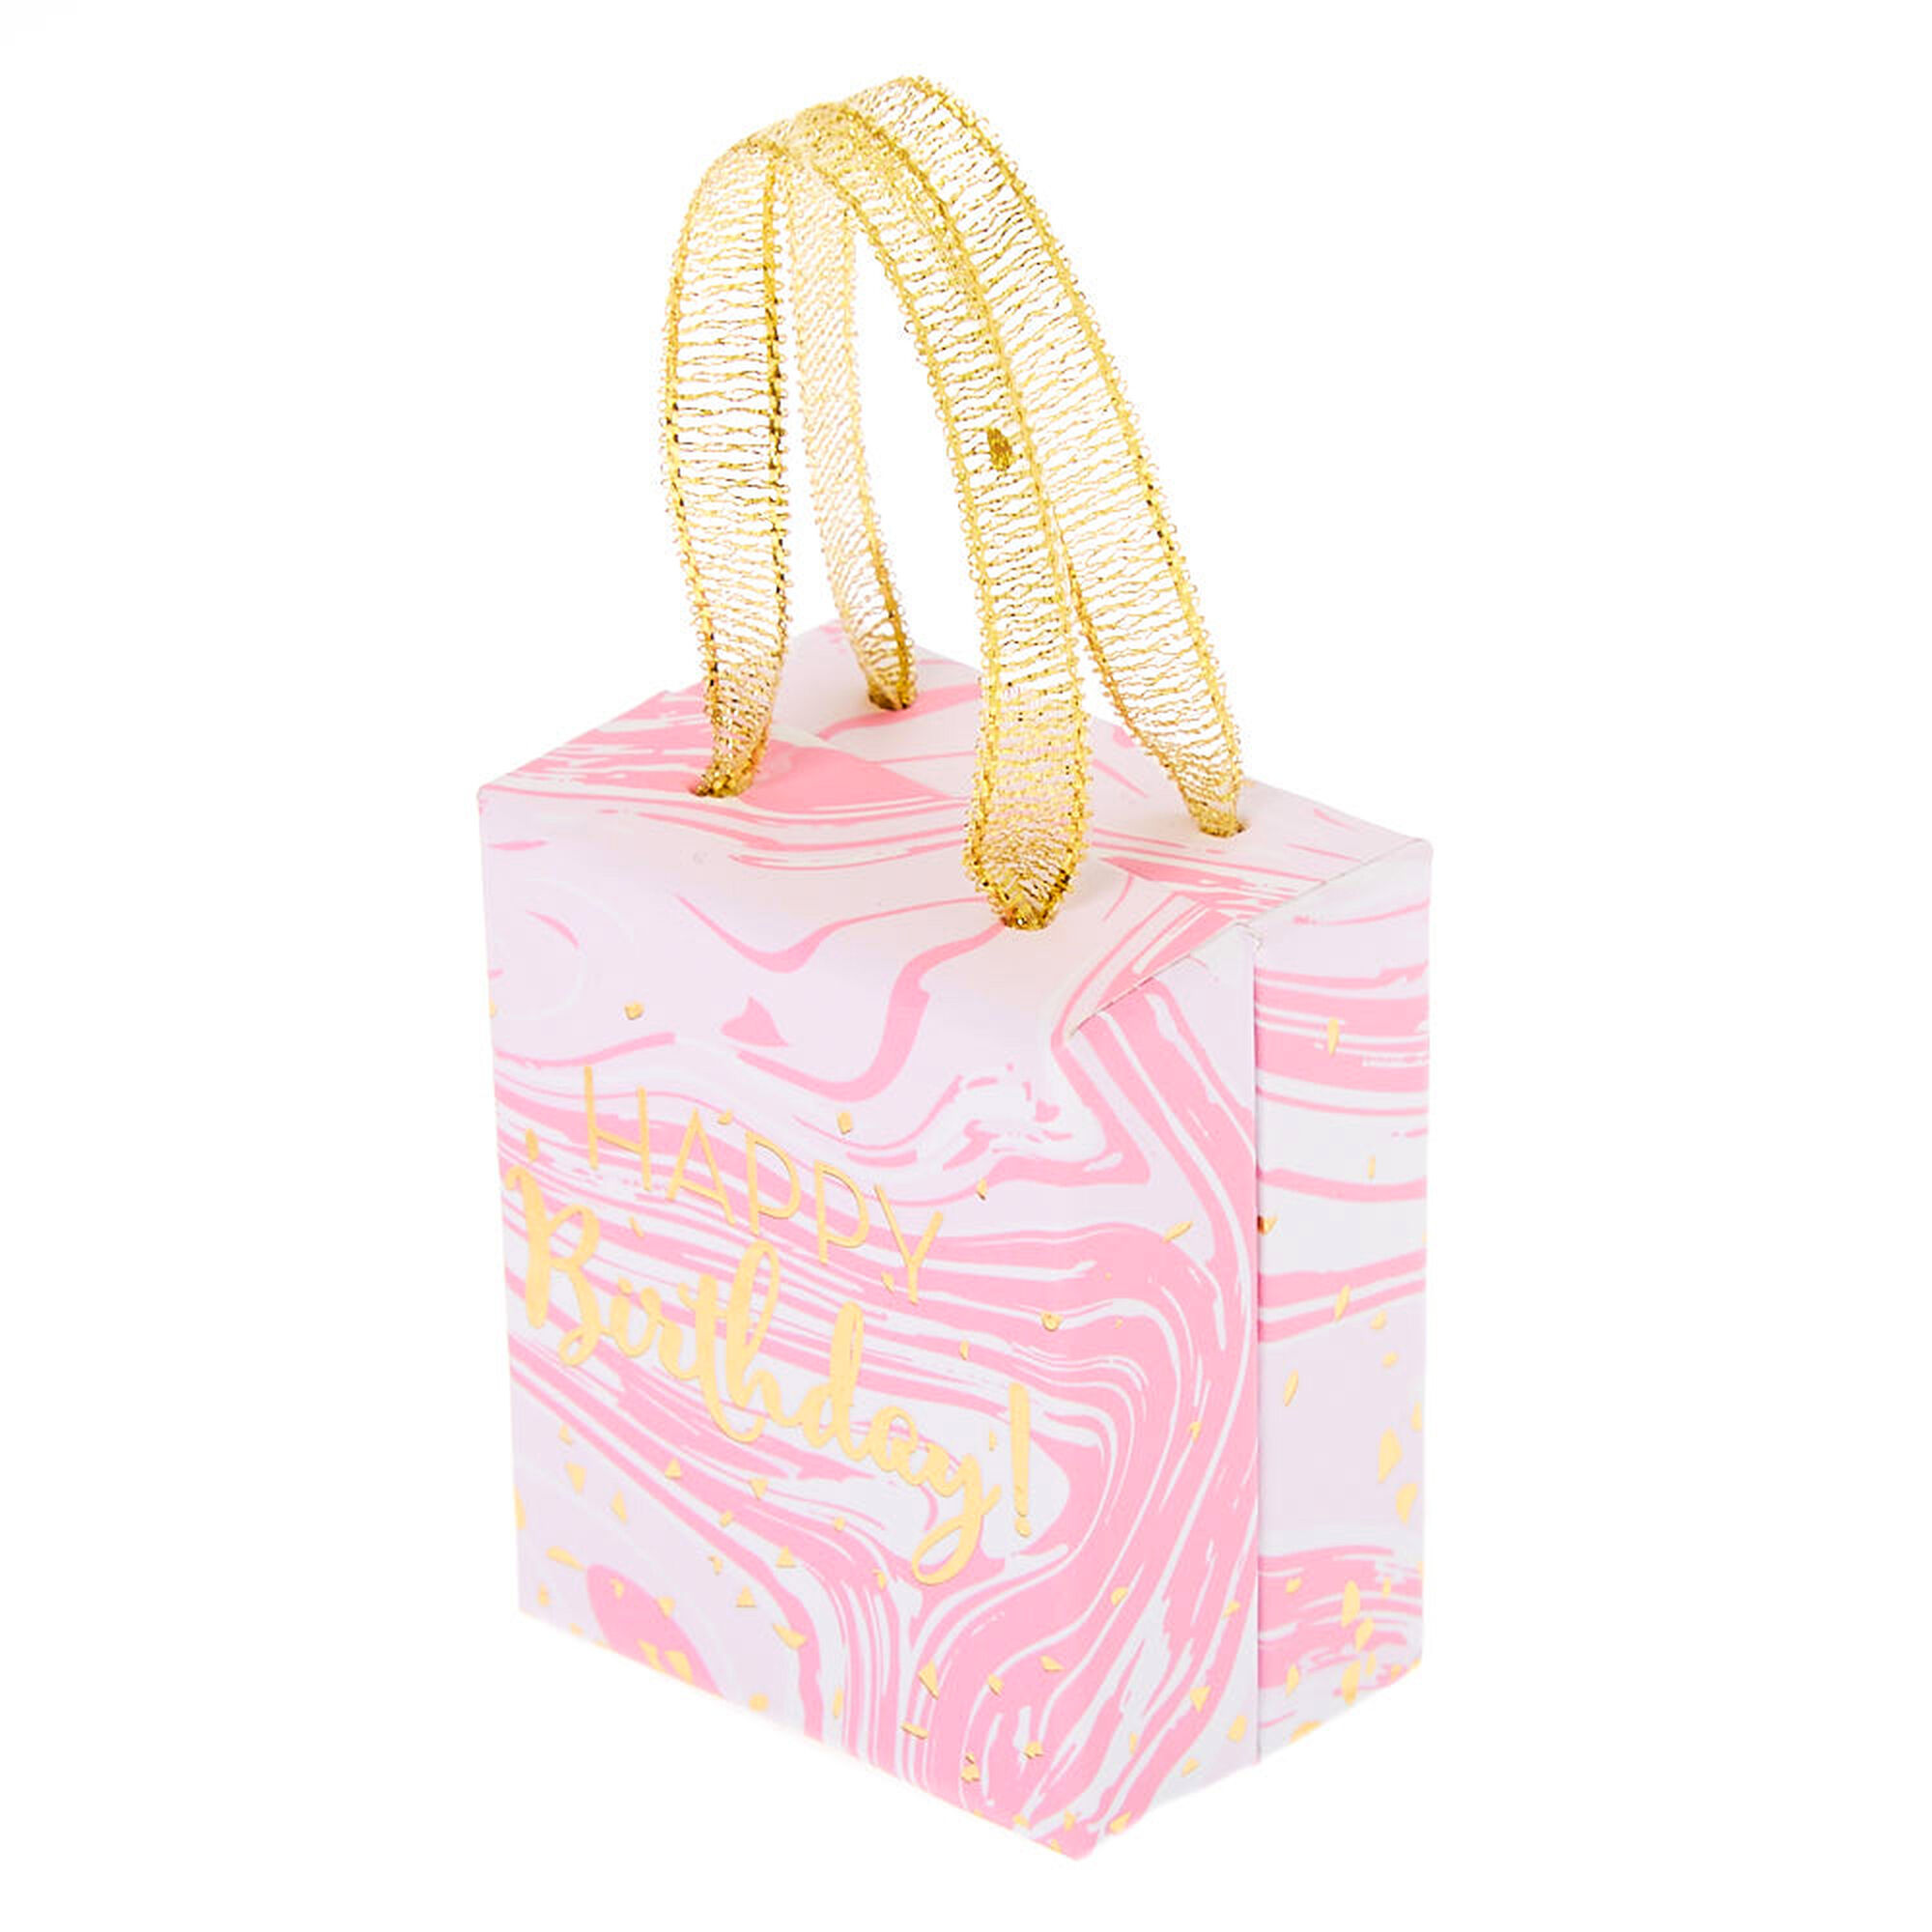 View Claires Small Happy Birthday Marble Gift Box Pink information